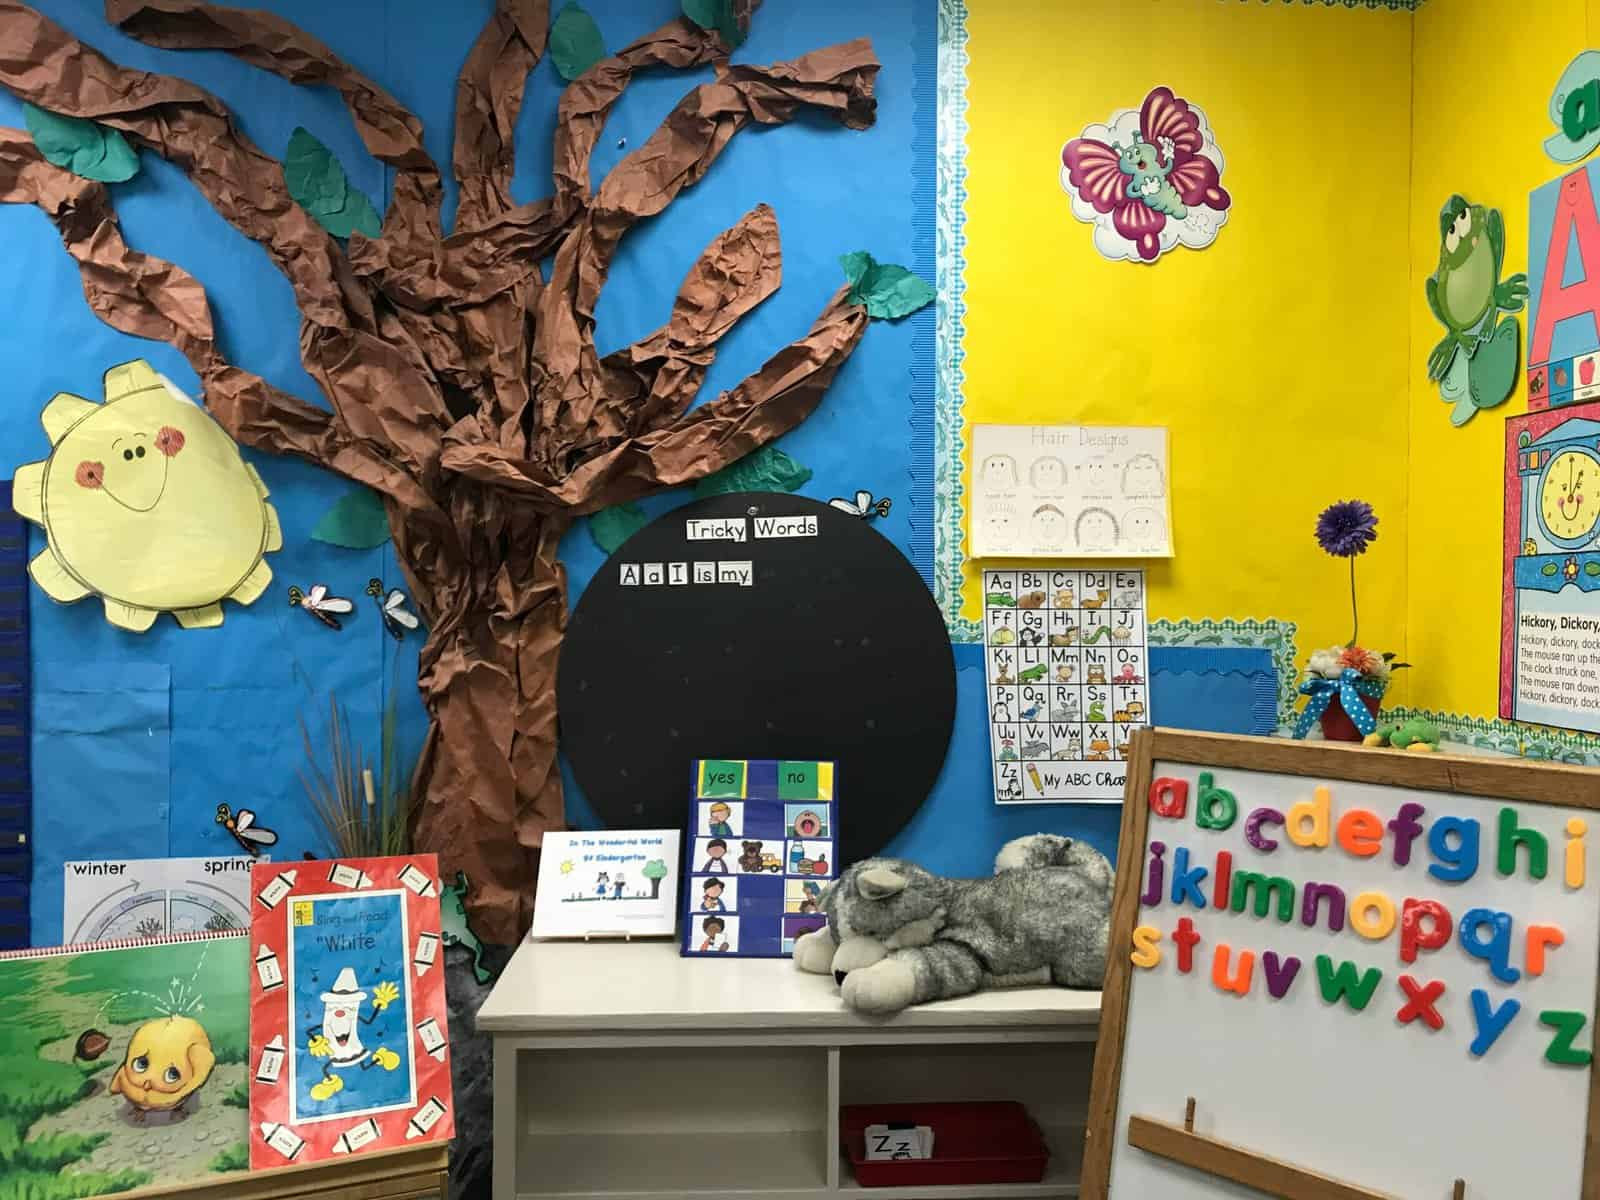 A corner of a child's classroom decorated with colorful walls and charts.